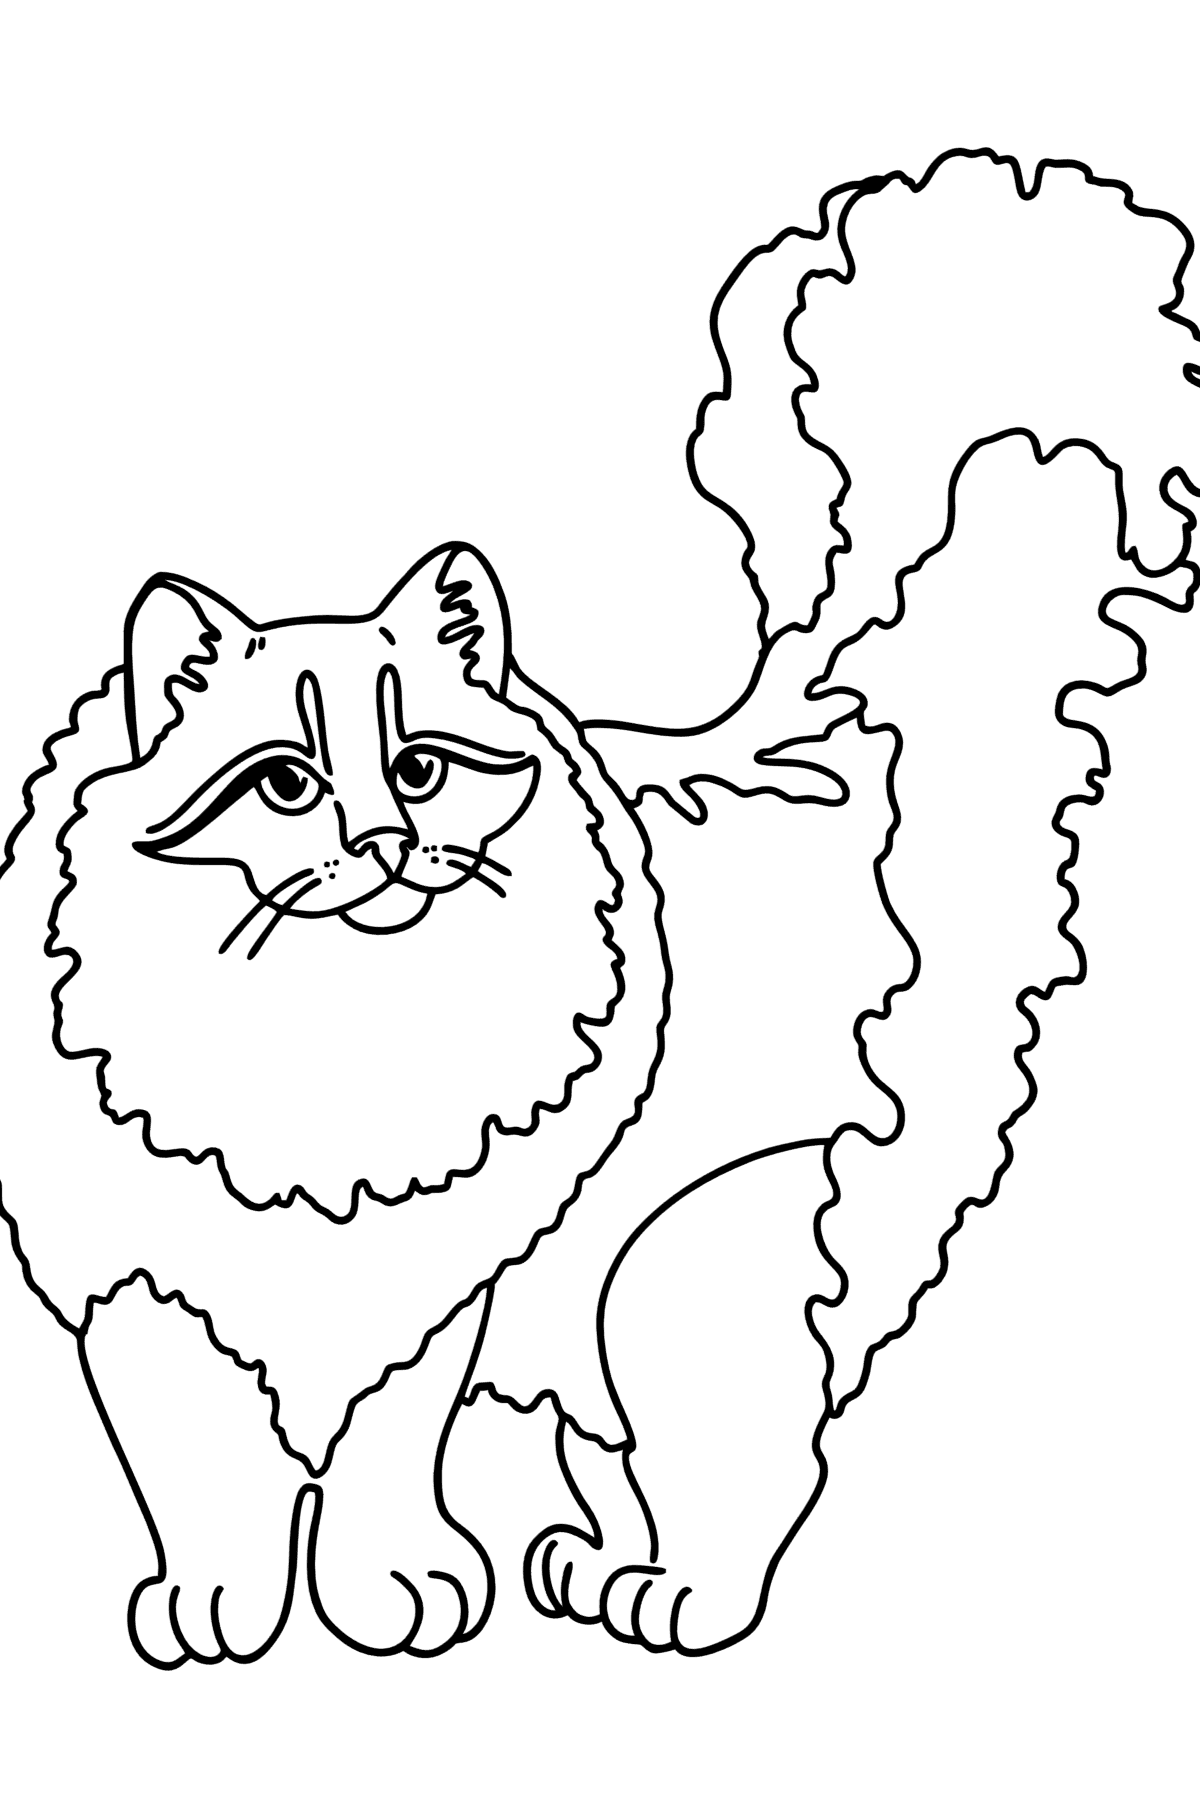 Siberian Cat coloring page - Coloring Pages for Kids